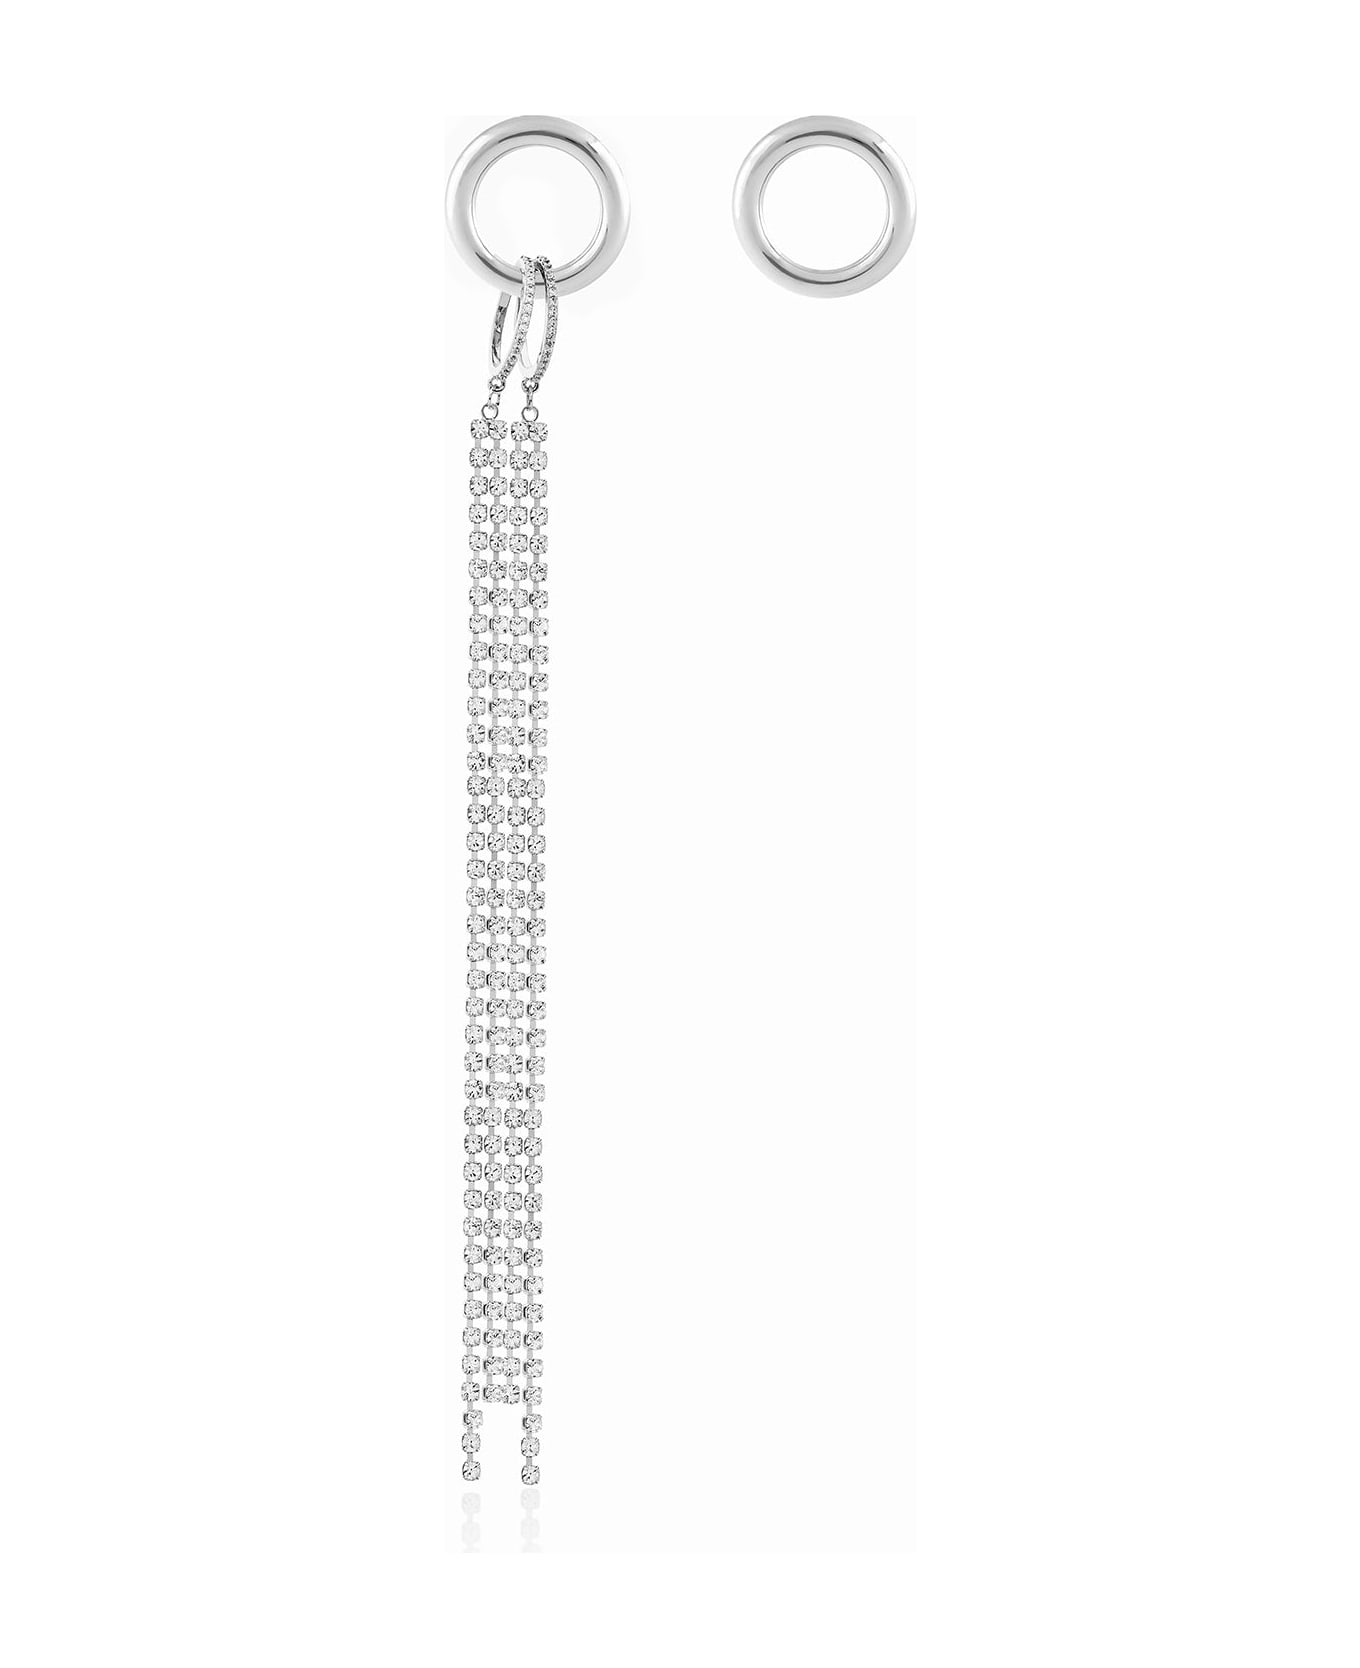 Federica Tosi Earring Carre 'silver - SILVER